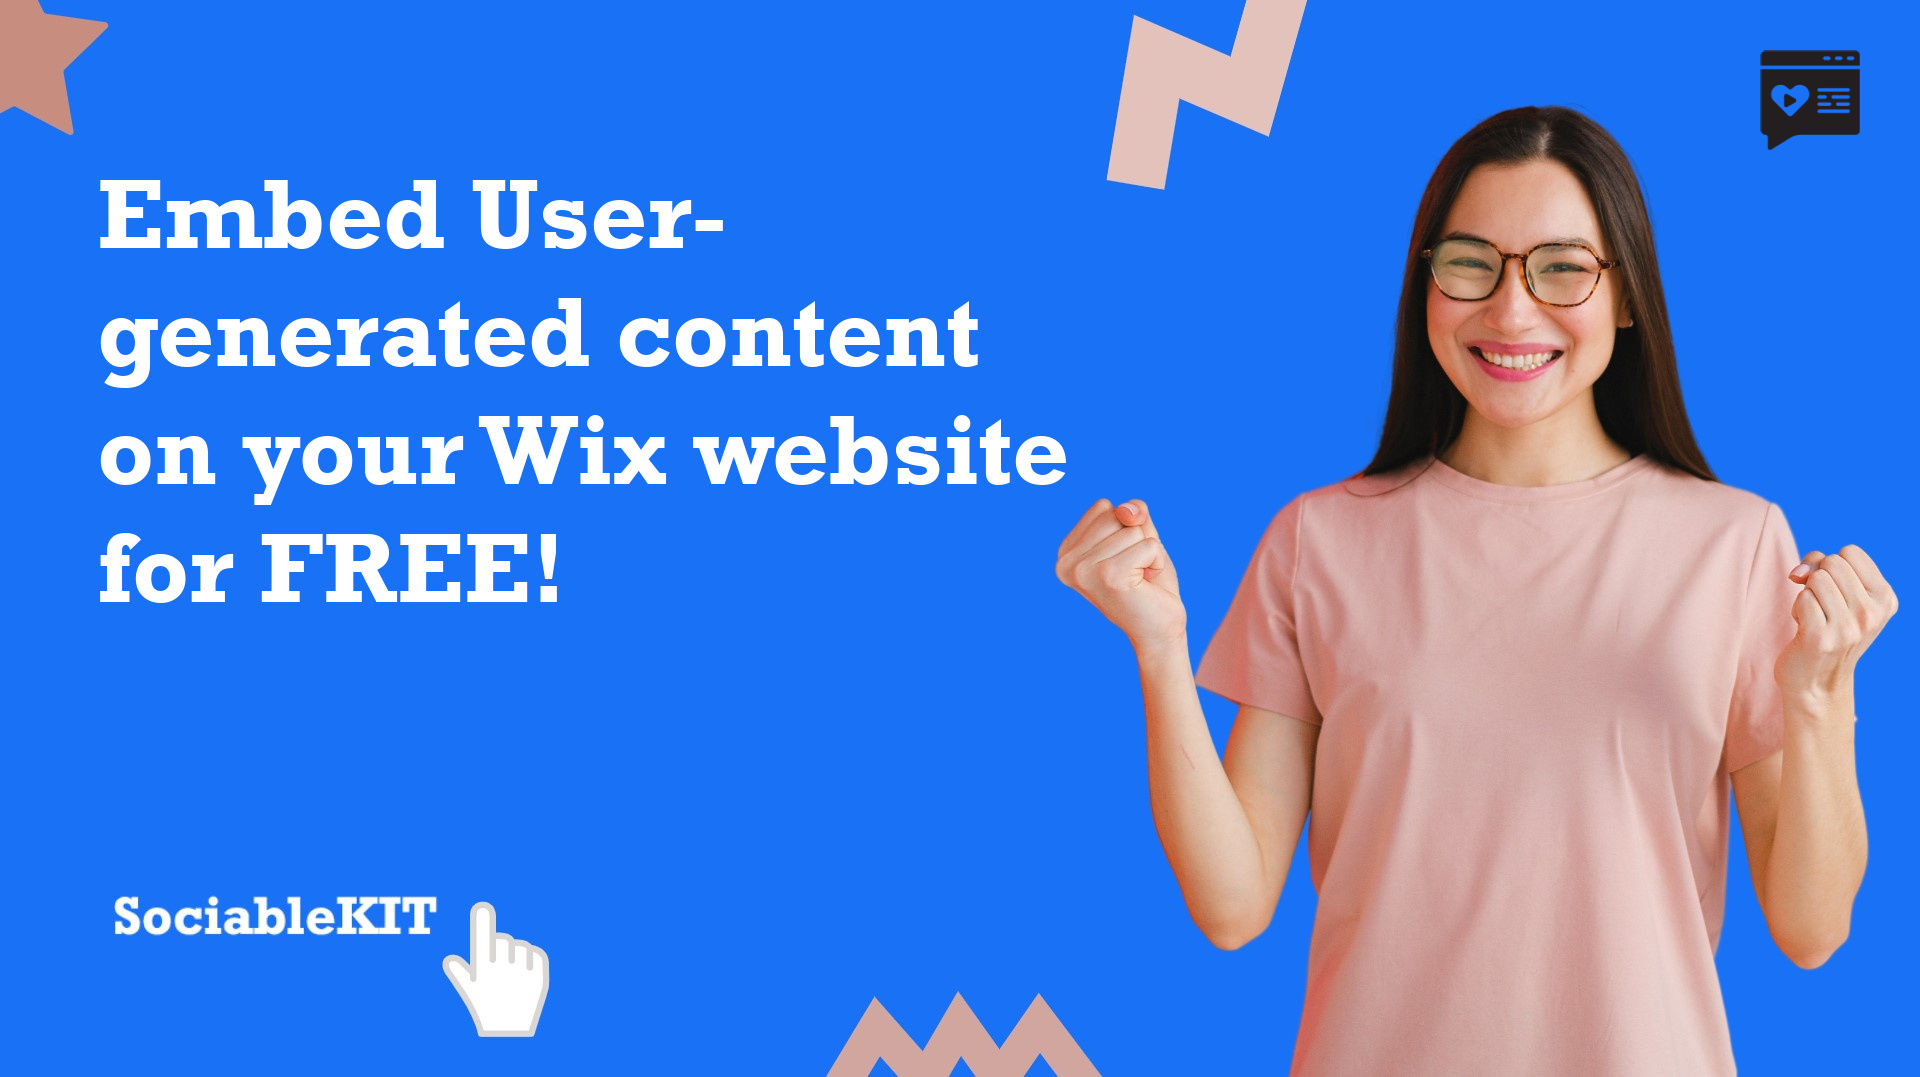 How to embed User-generated content on your Wix website for FREE?